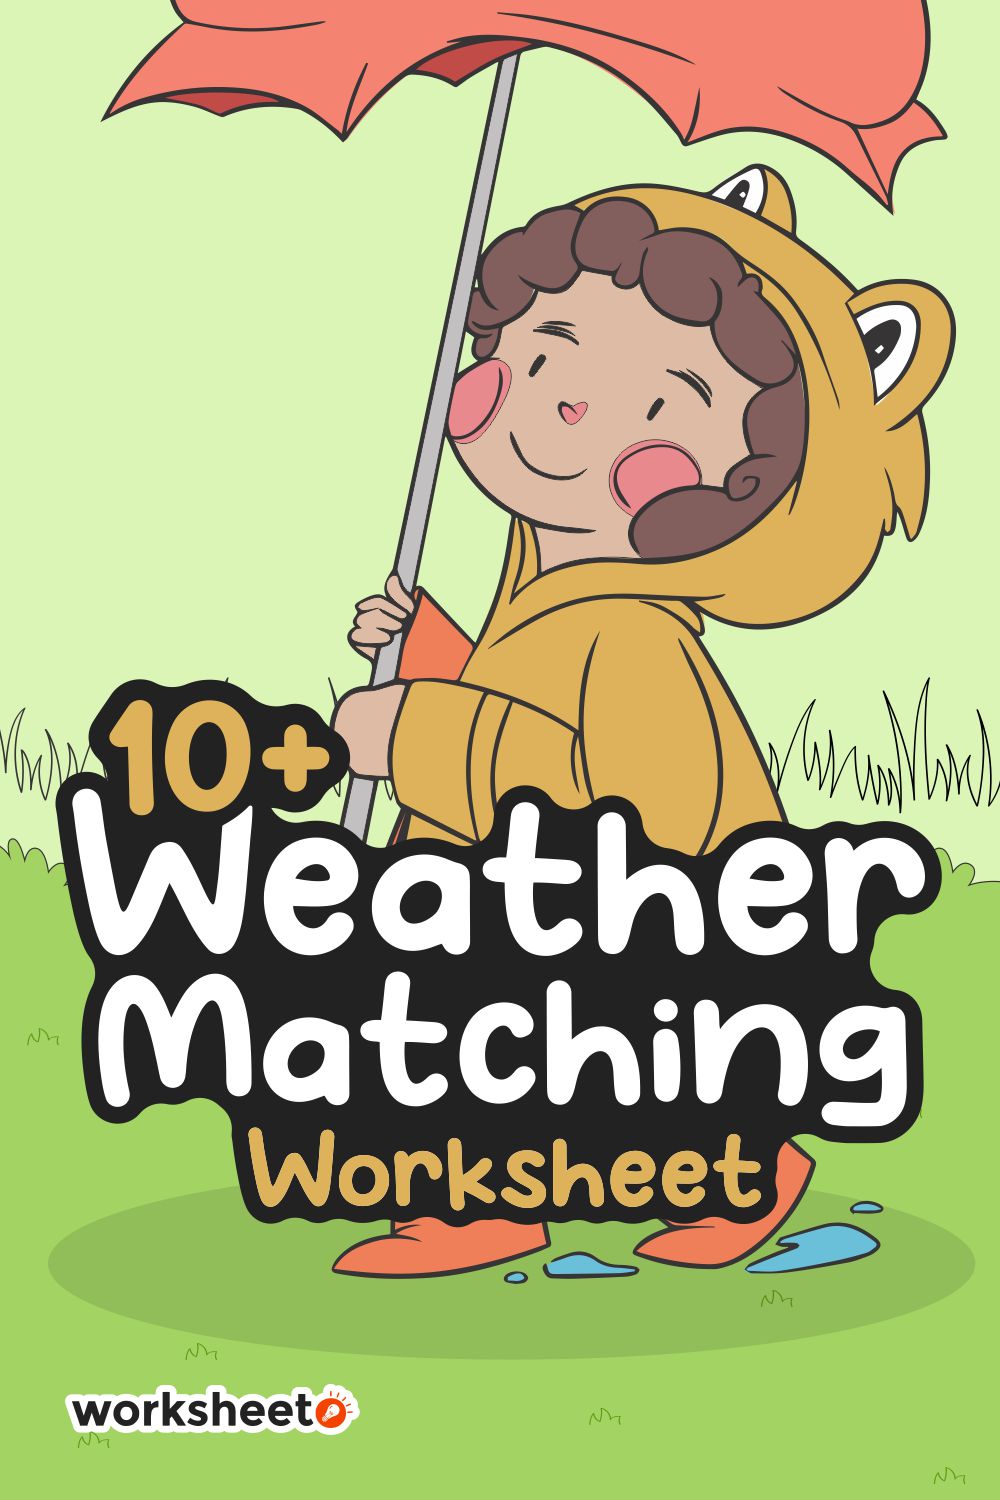 13 Images of Weather Matching Worksheet